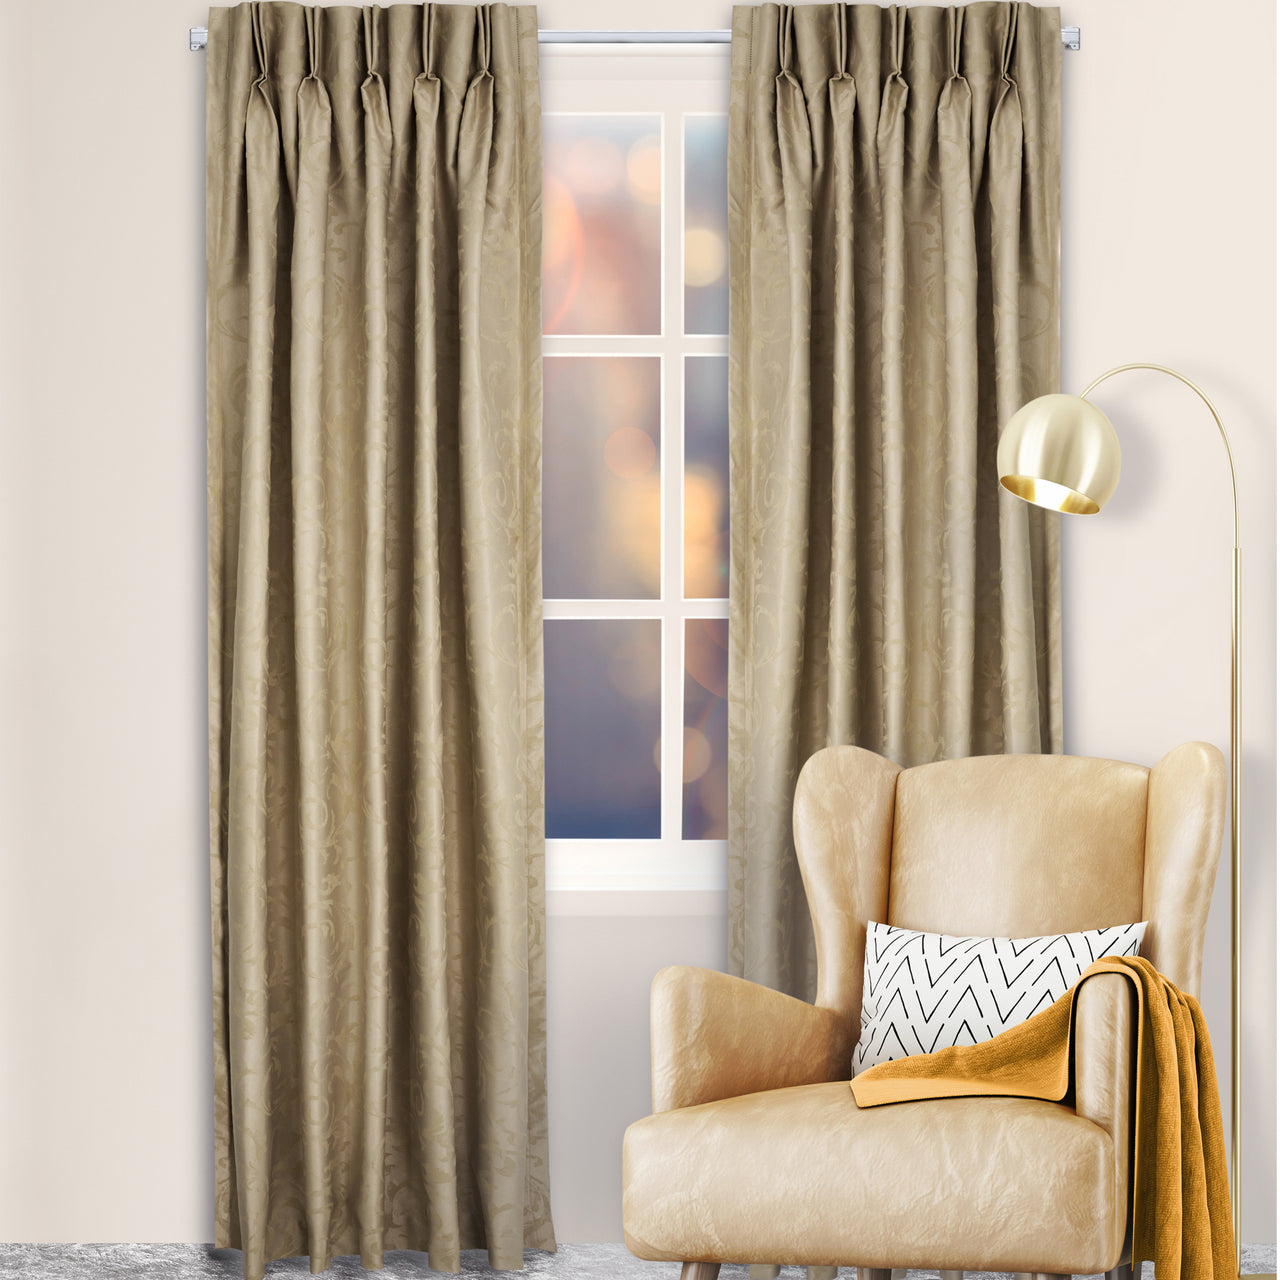 Vermouth Reno Pinch Pleat Blockout Curtains (Set of 2)